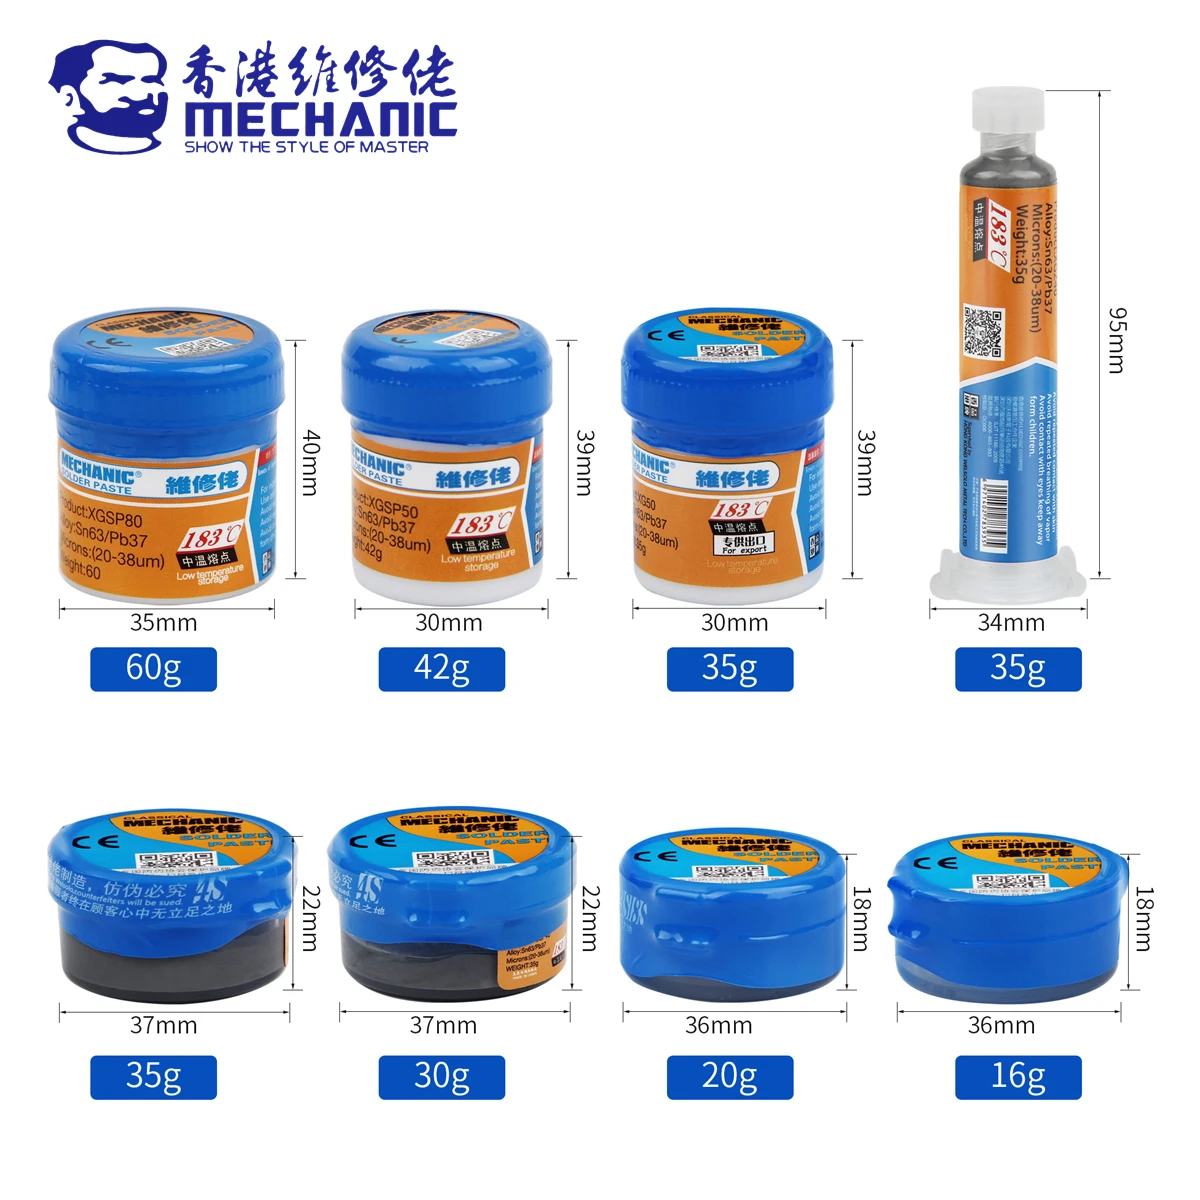 MECHANIC XG Series 183℃ Tin Solder Paste Environment Friendly Soldering Flux for LED PCB Board Electronic Component Phone Repair images - 6